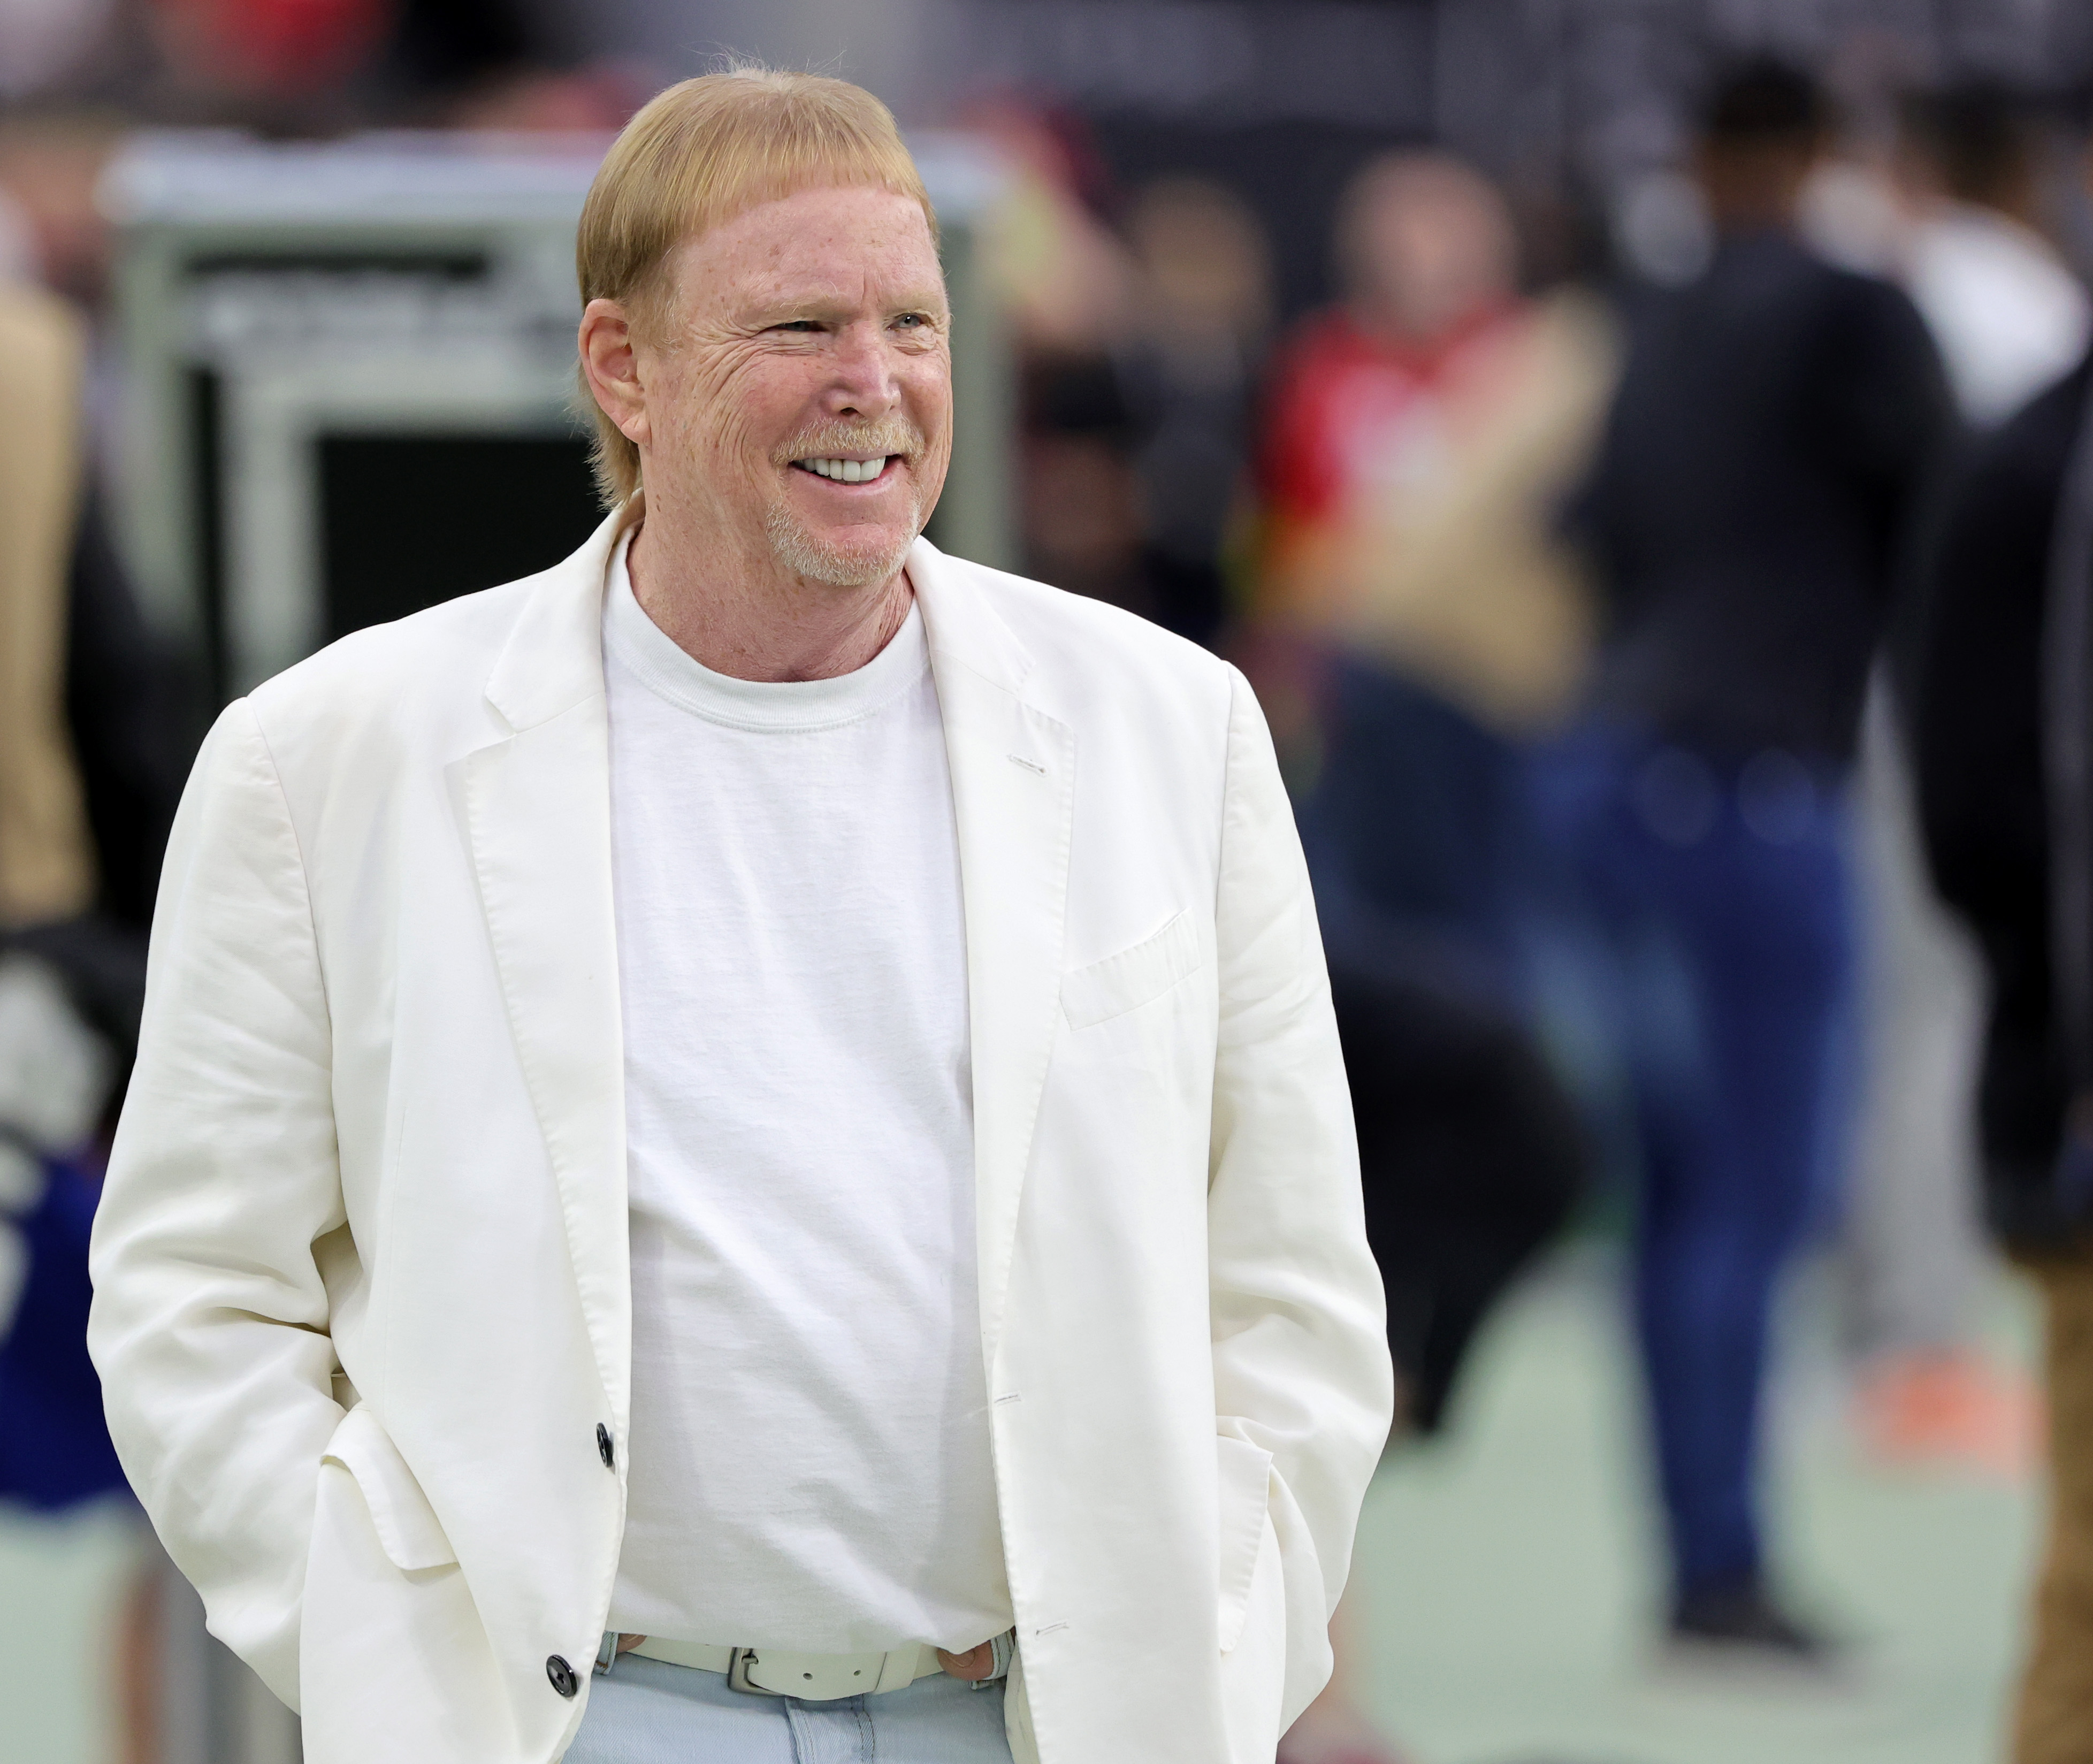 Who was the mystery blonde sitting next to Las Vegas Raiders owner Mark  Davis?